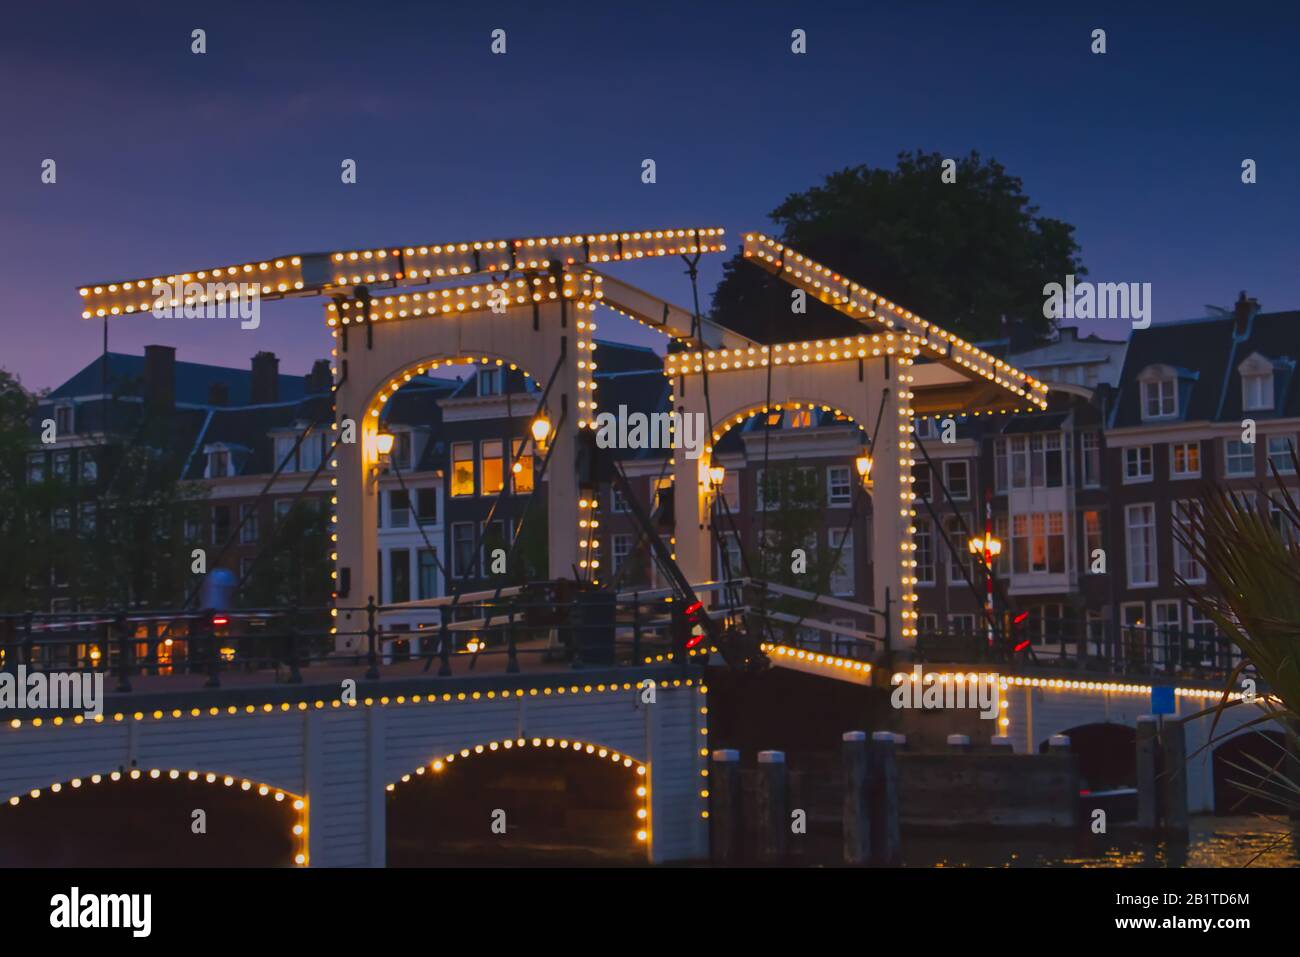 Magere Brug (Skinny Bridge) illuminated at sunset over the river Amstel in Amsterdam, Netherlands Stock Photo